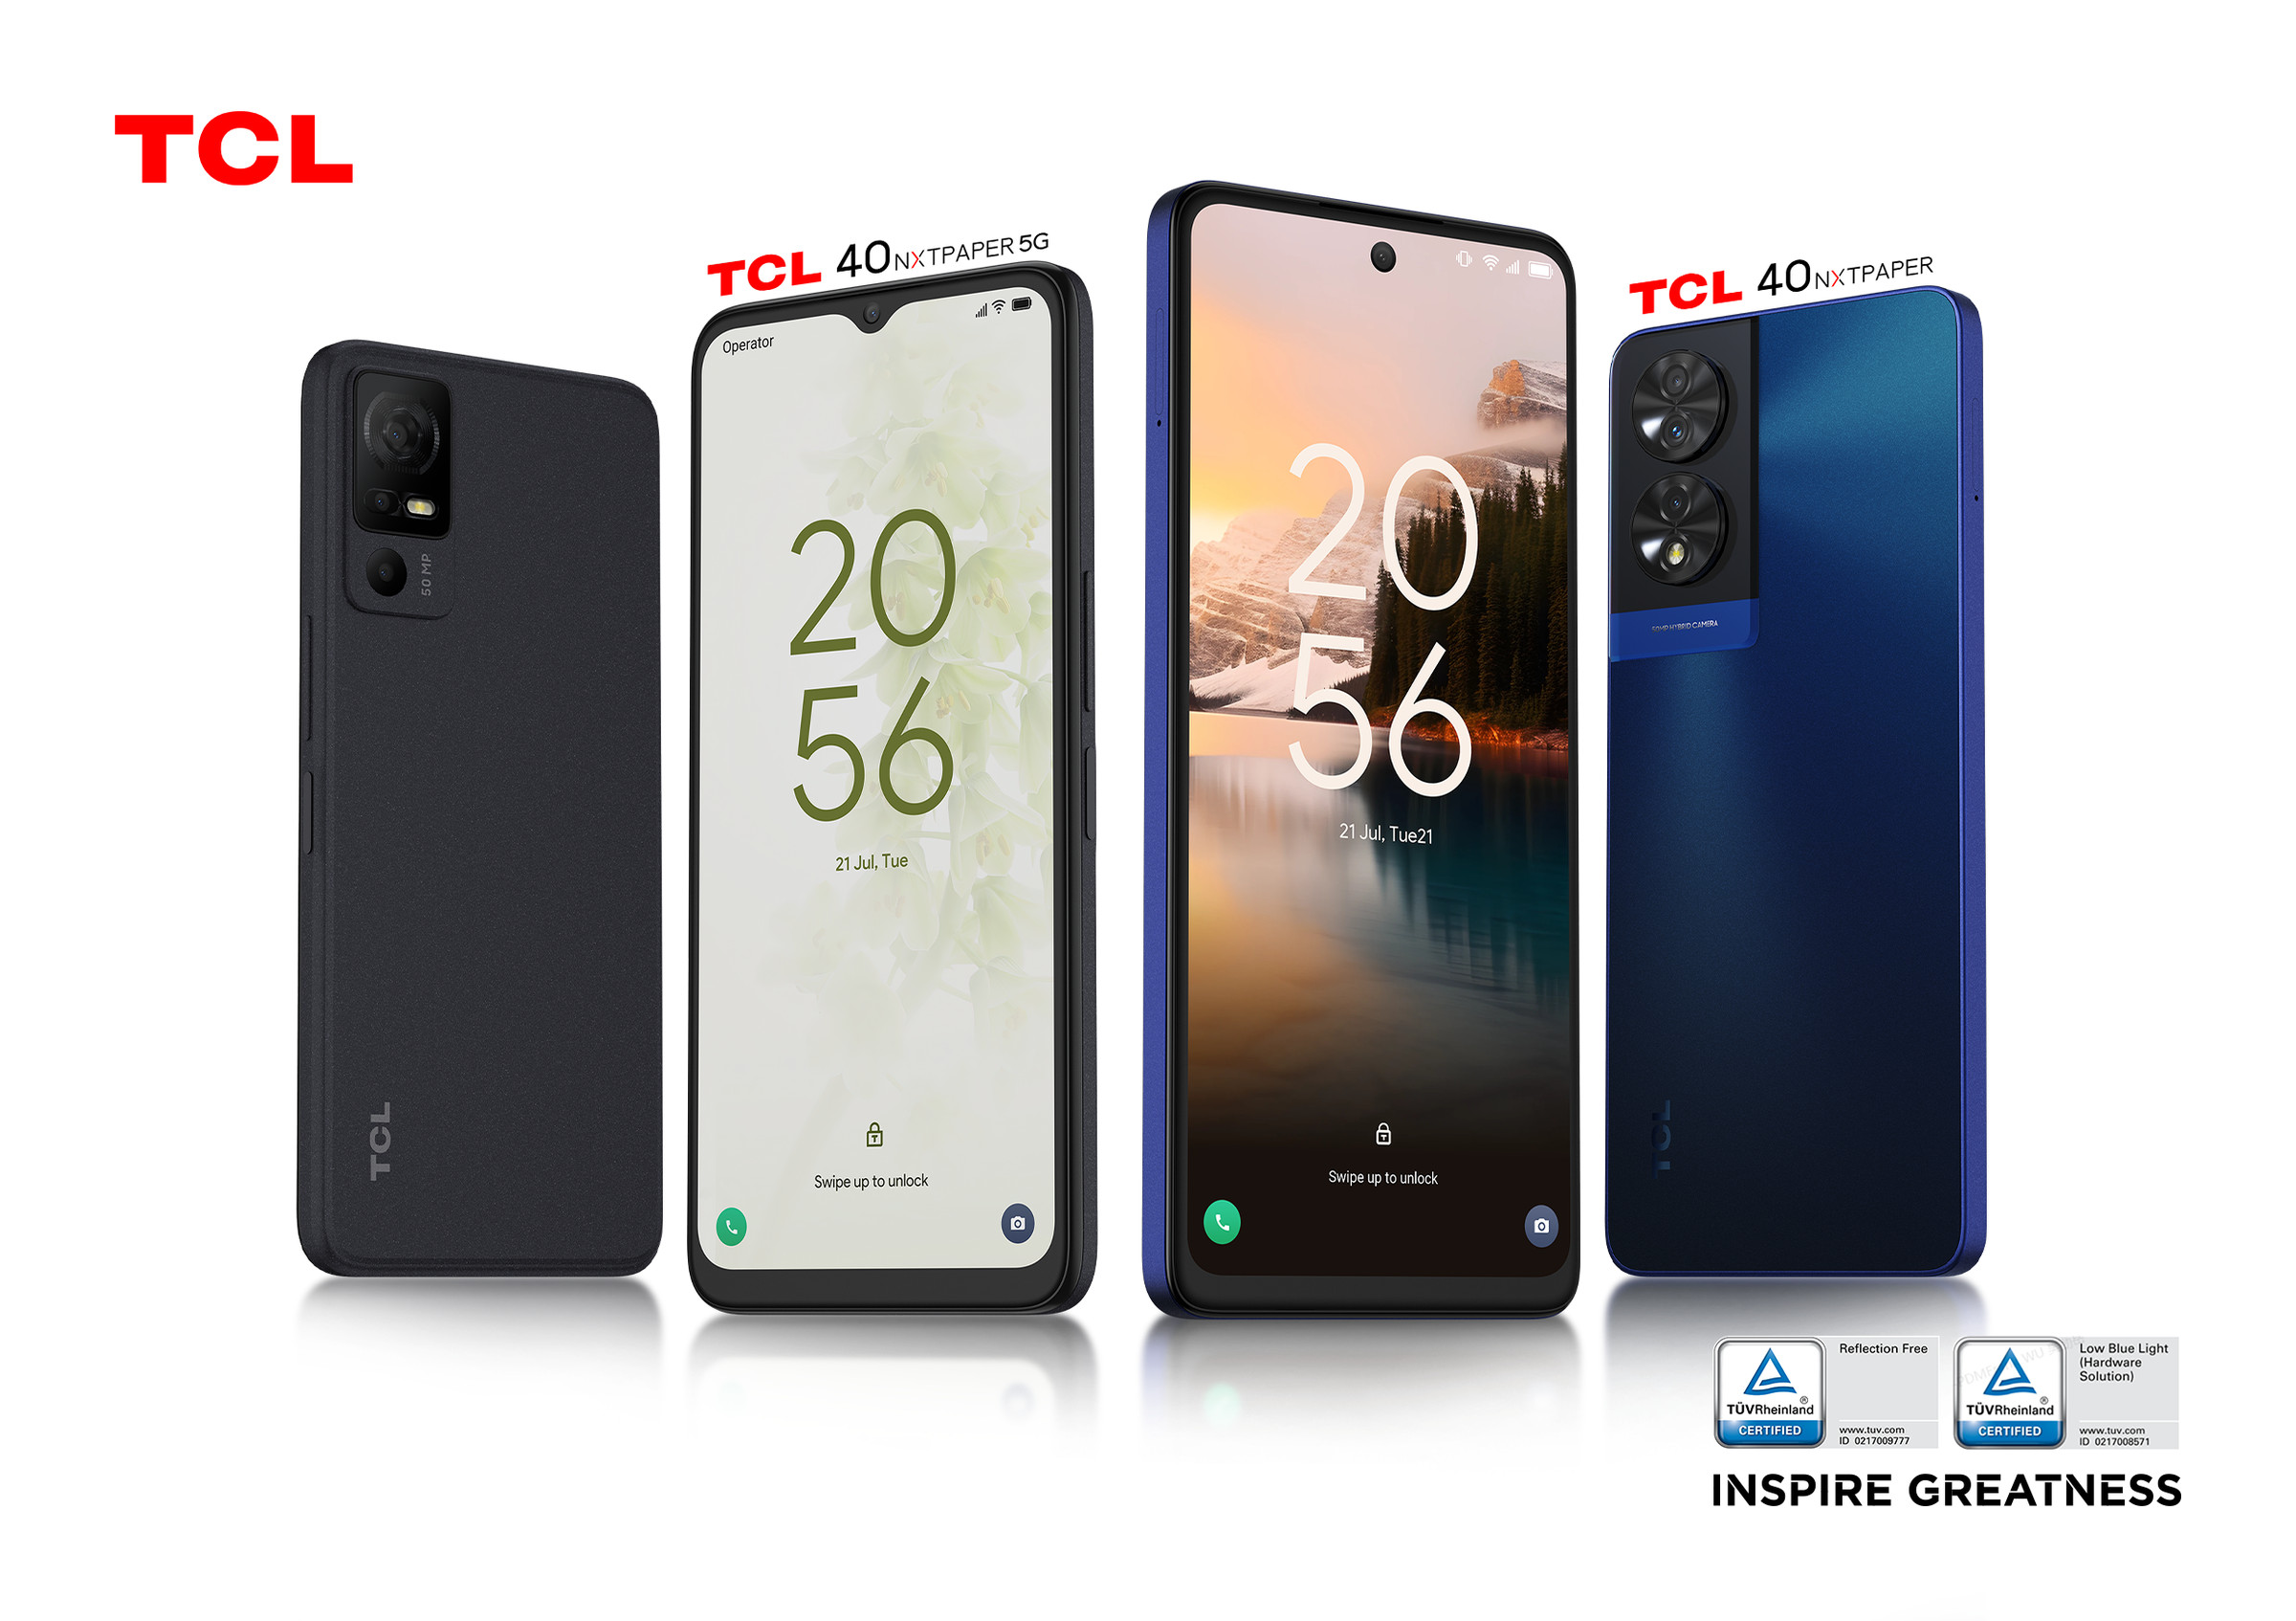 Rendering of front and back of both TCL NXTPAPER 40 phones